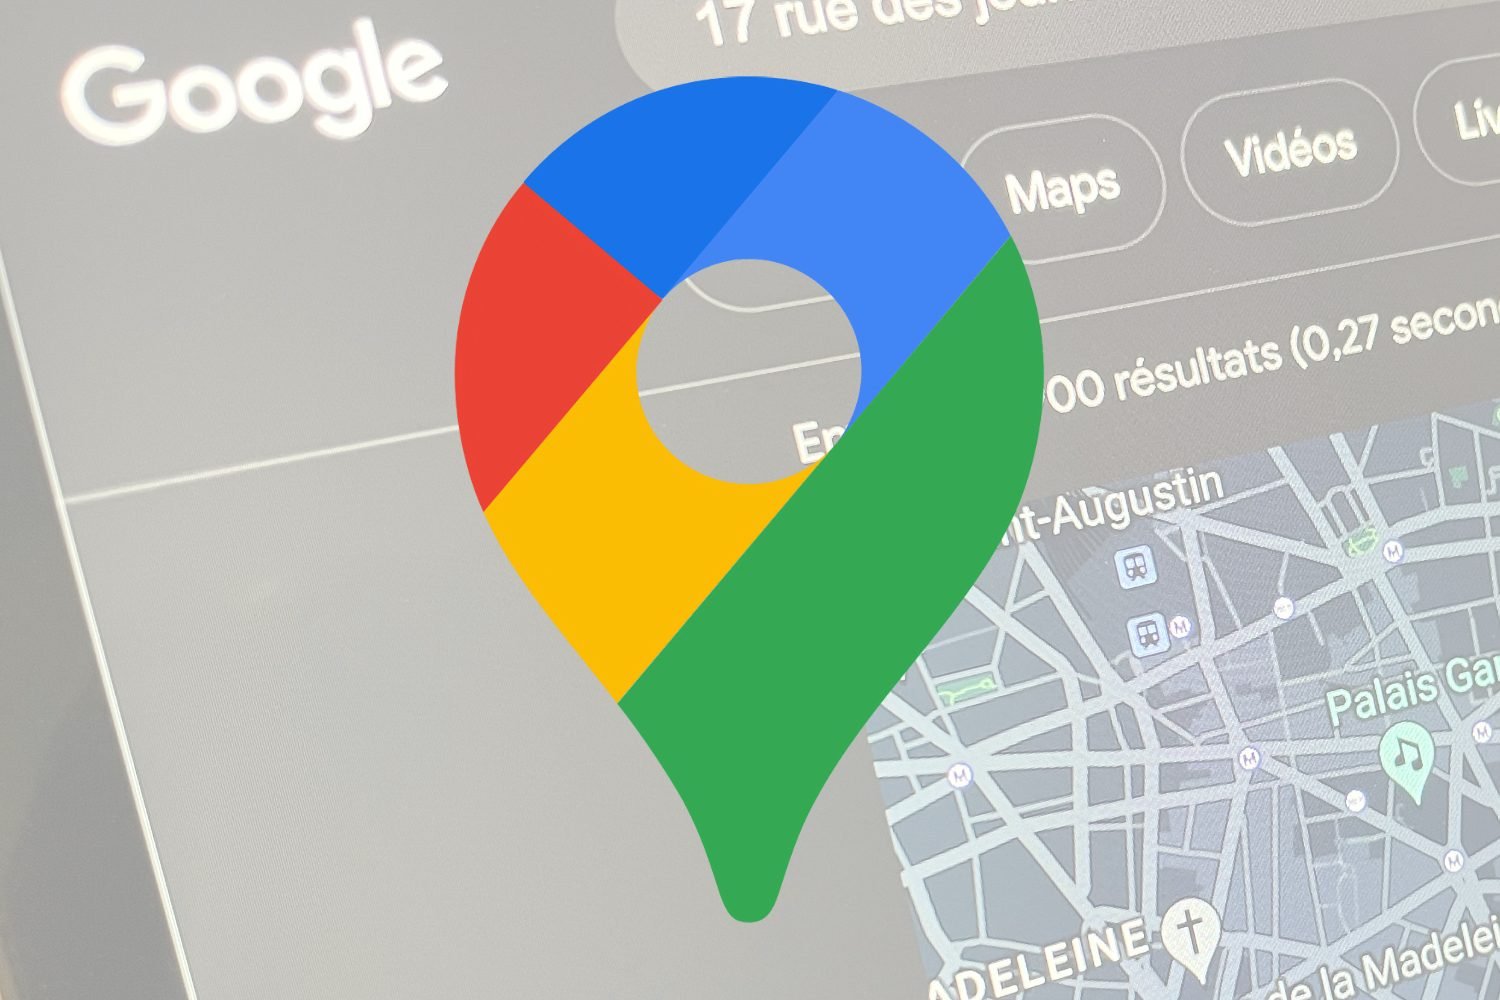 Google Maps returns to Google search results